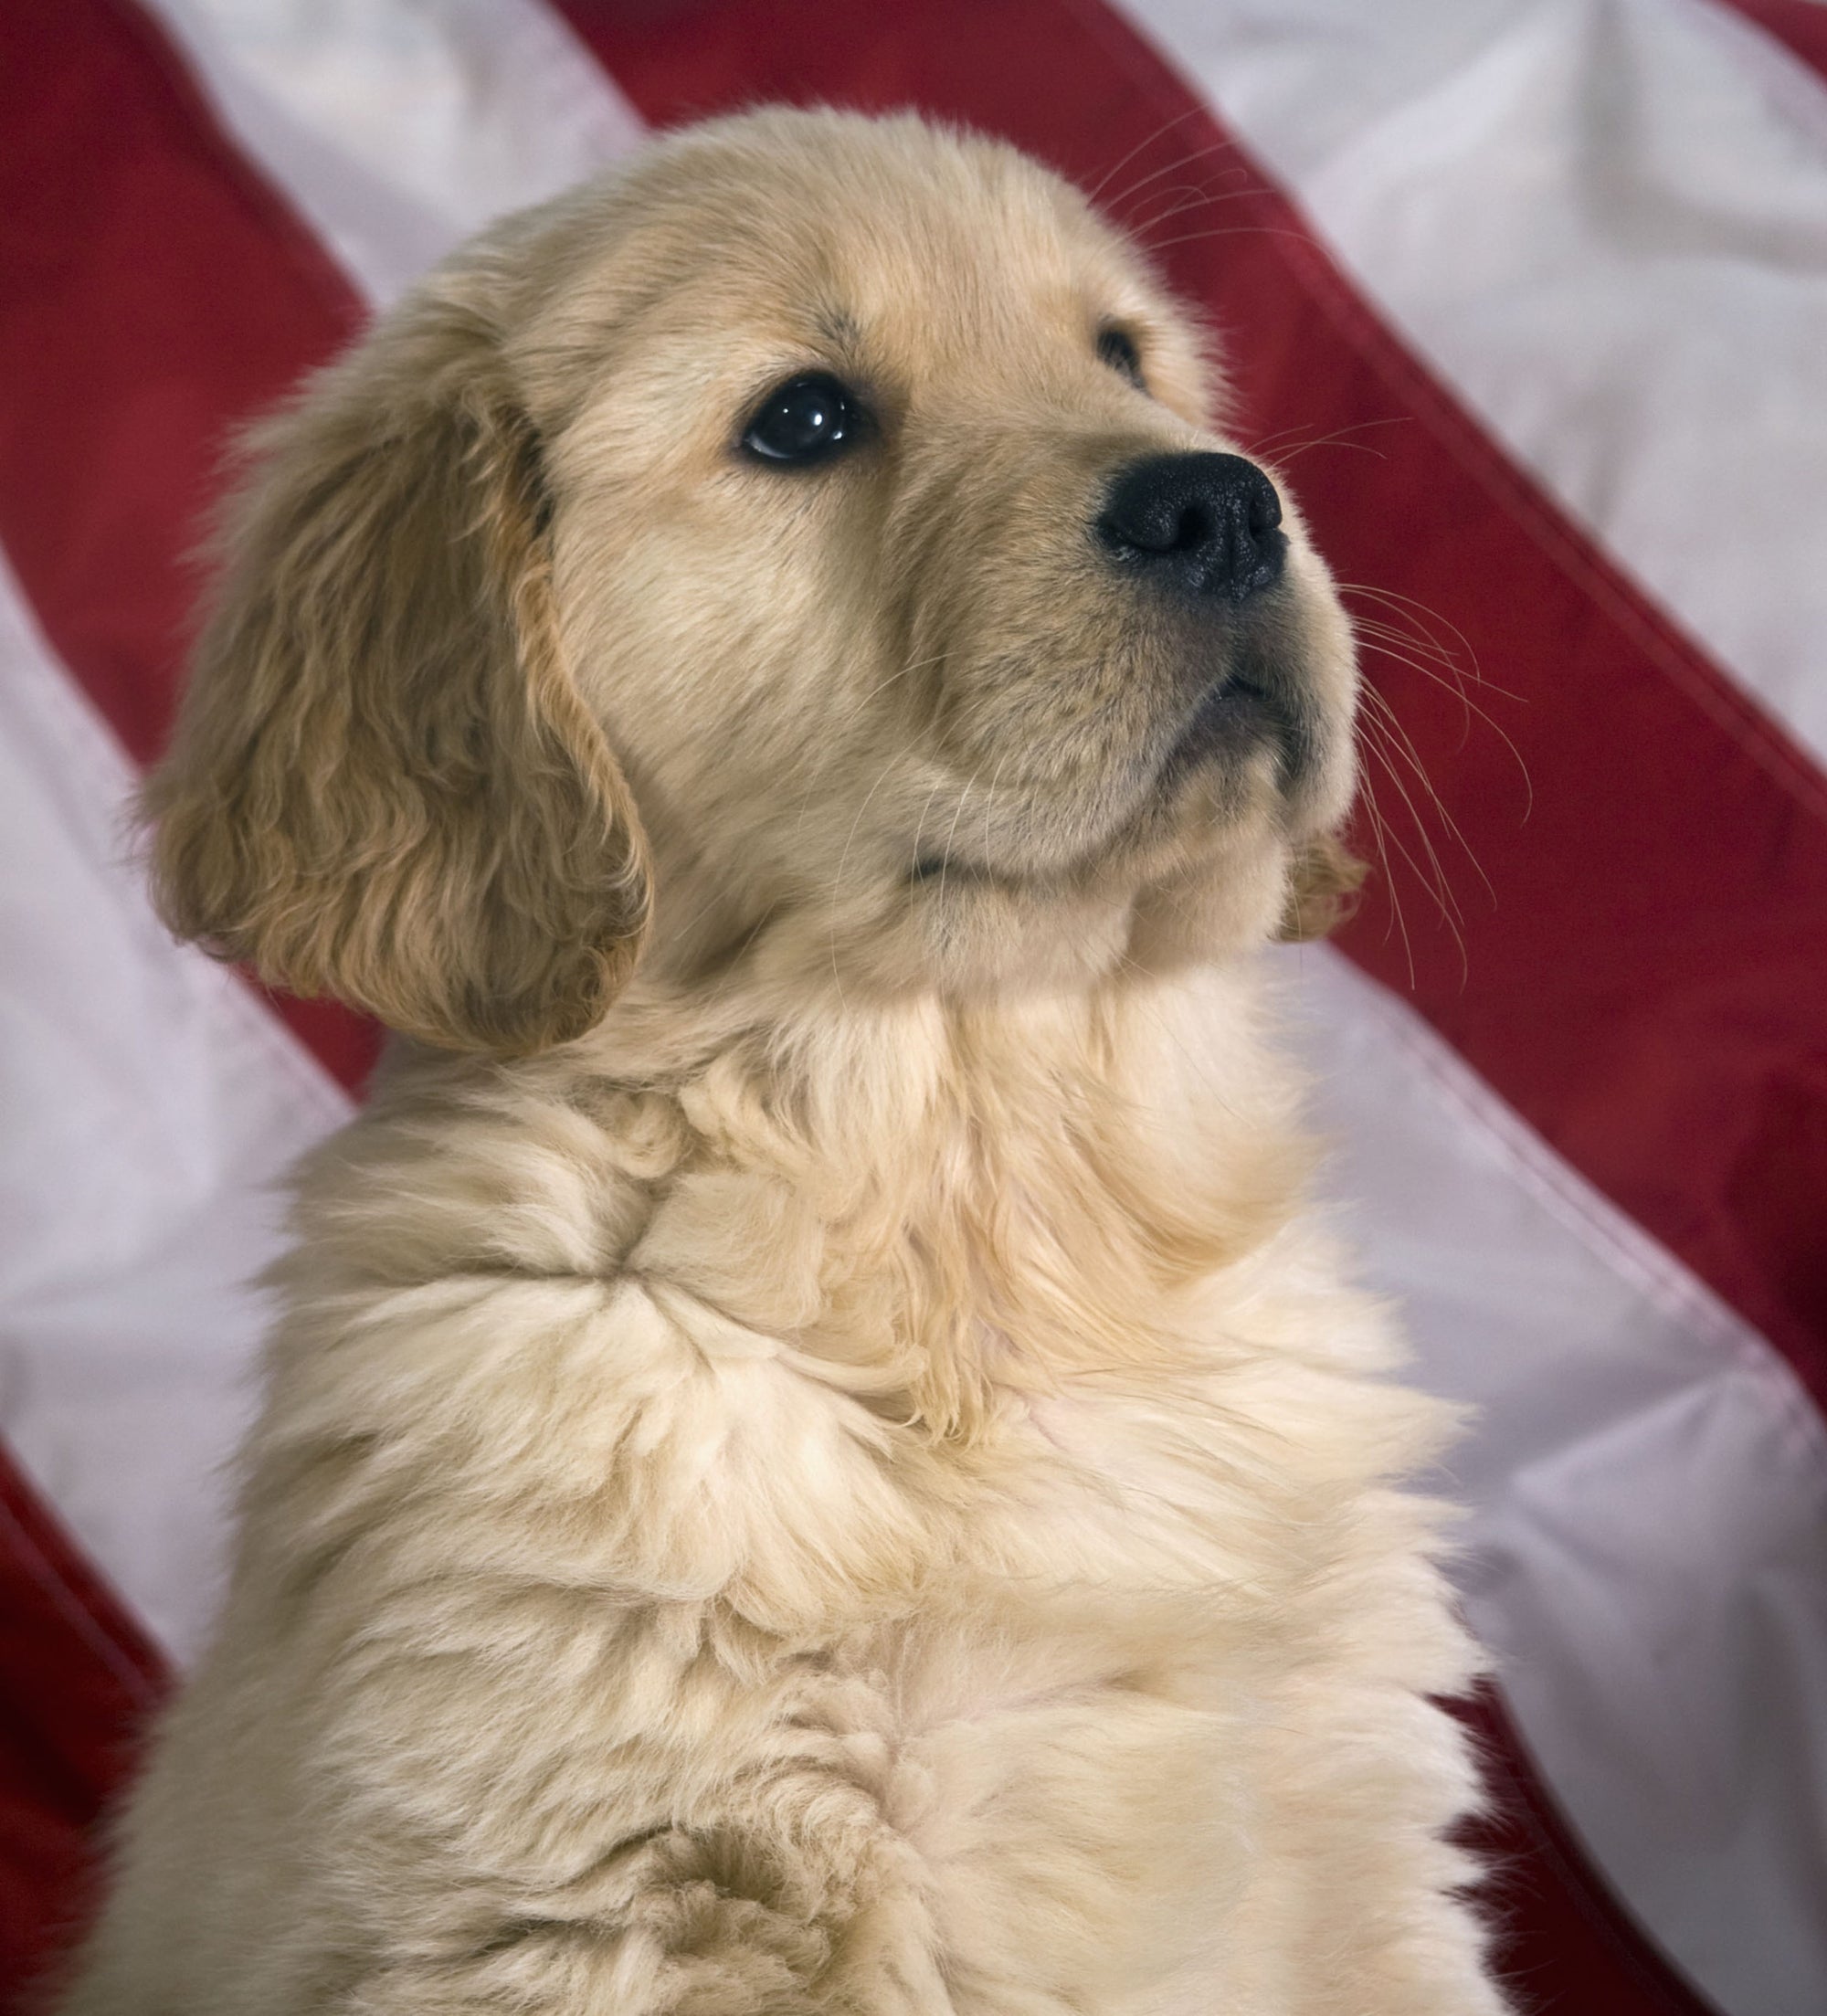 Keep Your Pets Safe This 4th of July